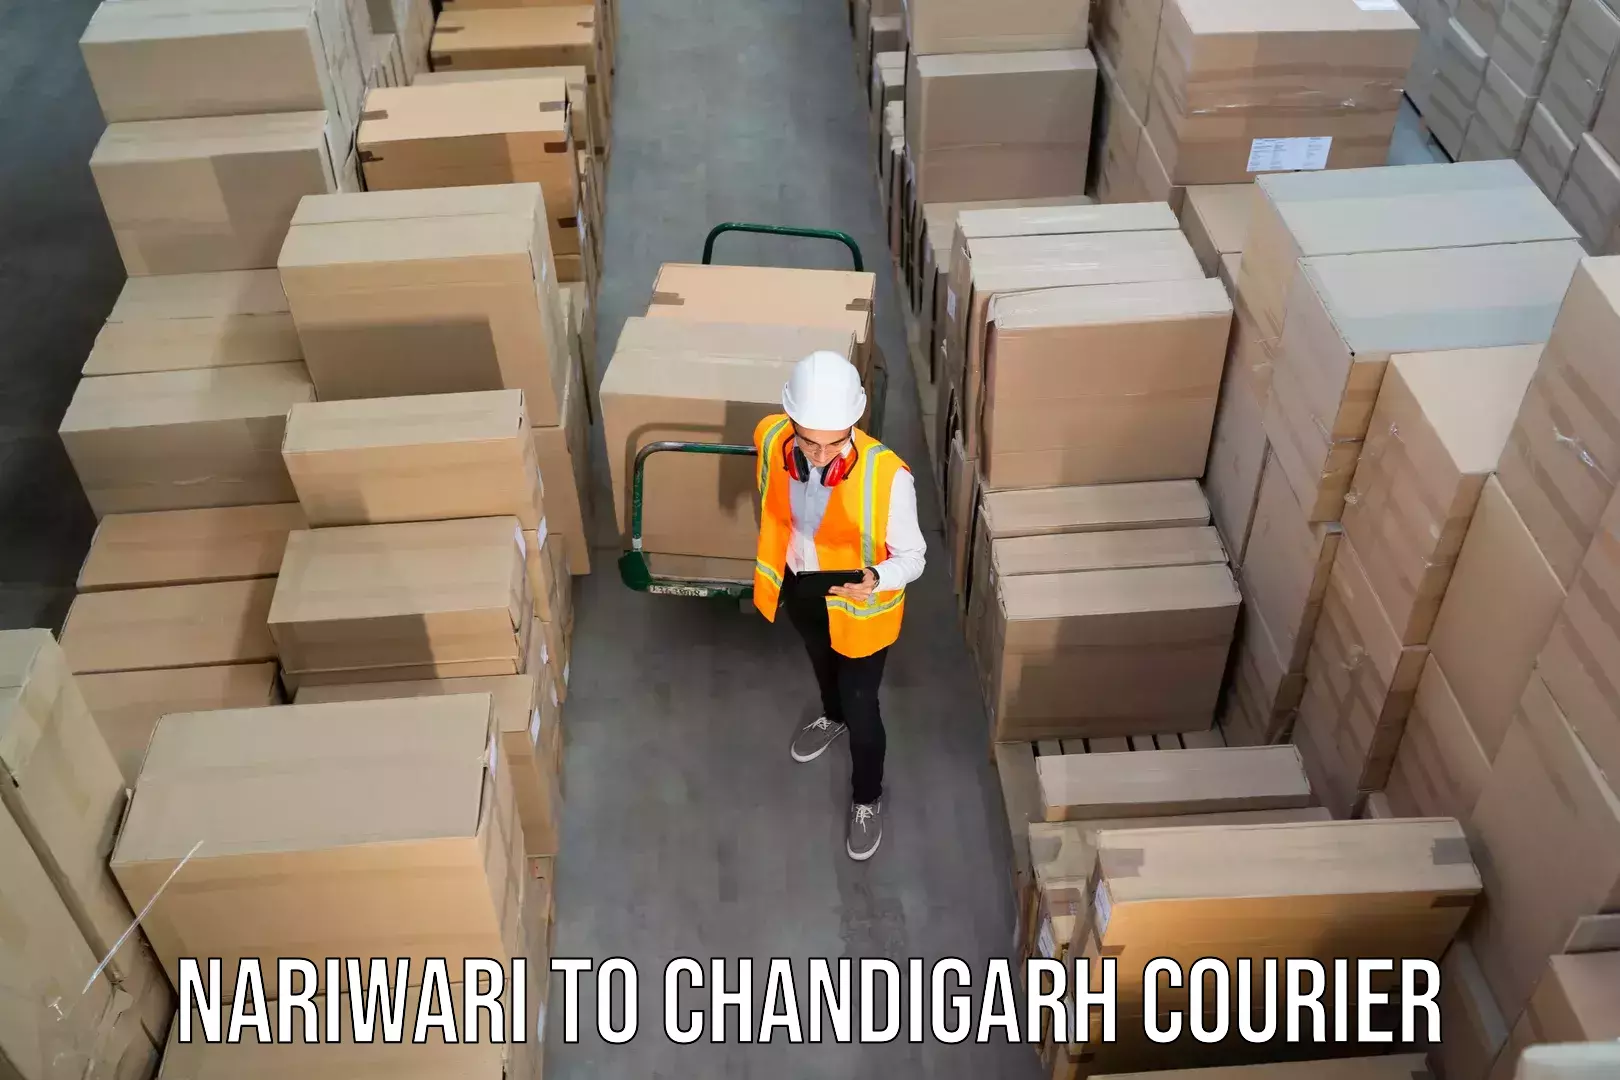 Multi-national courier services Nariwari to Chandigarh